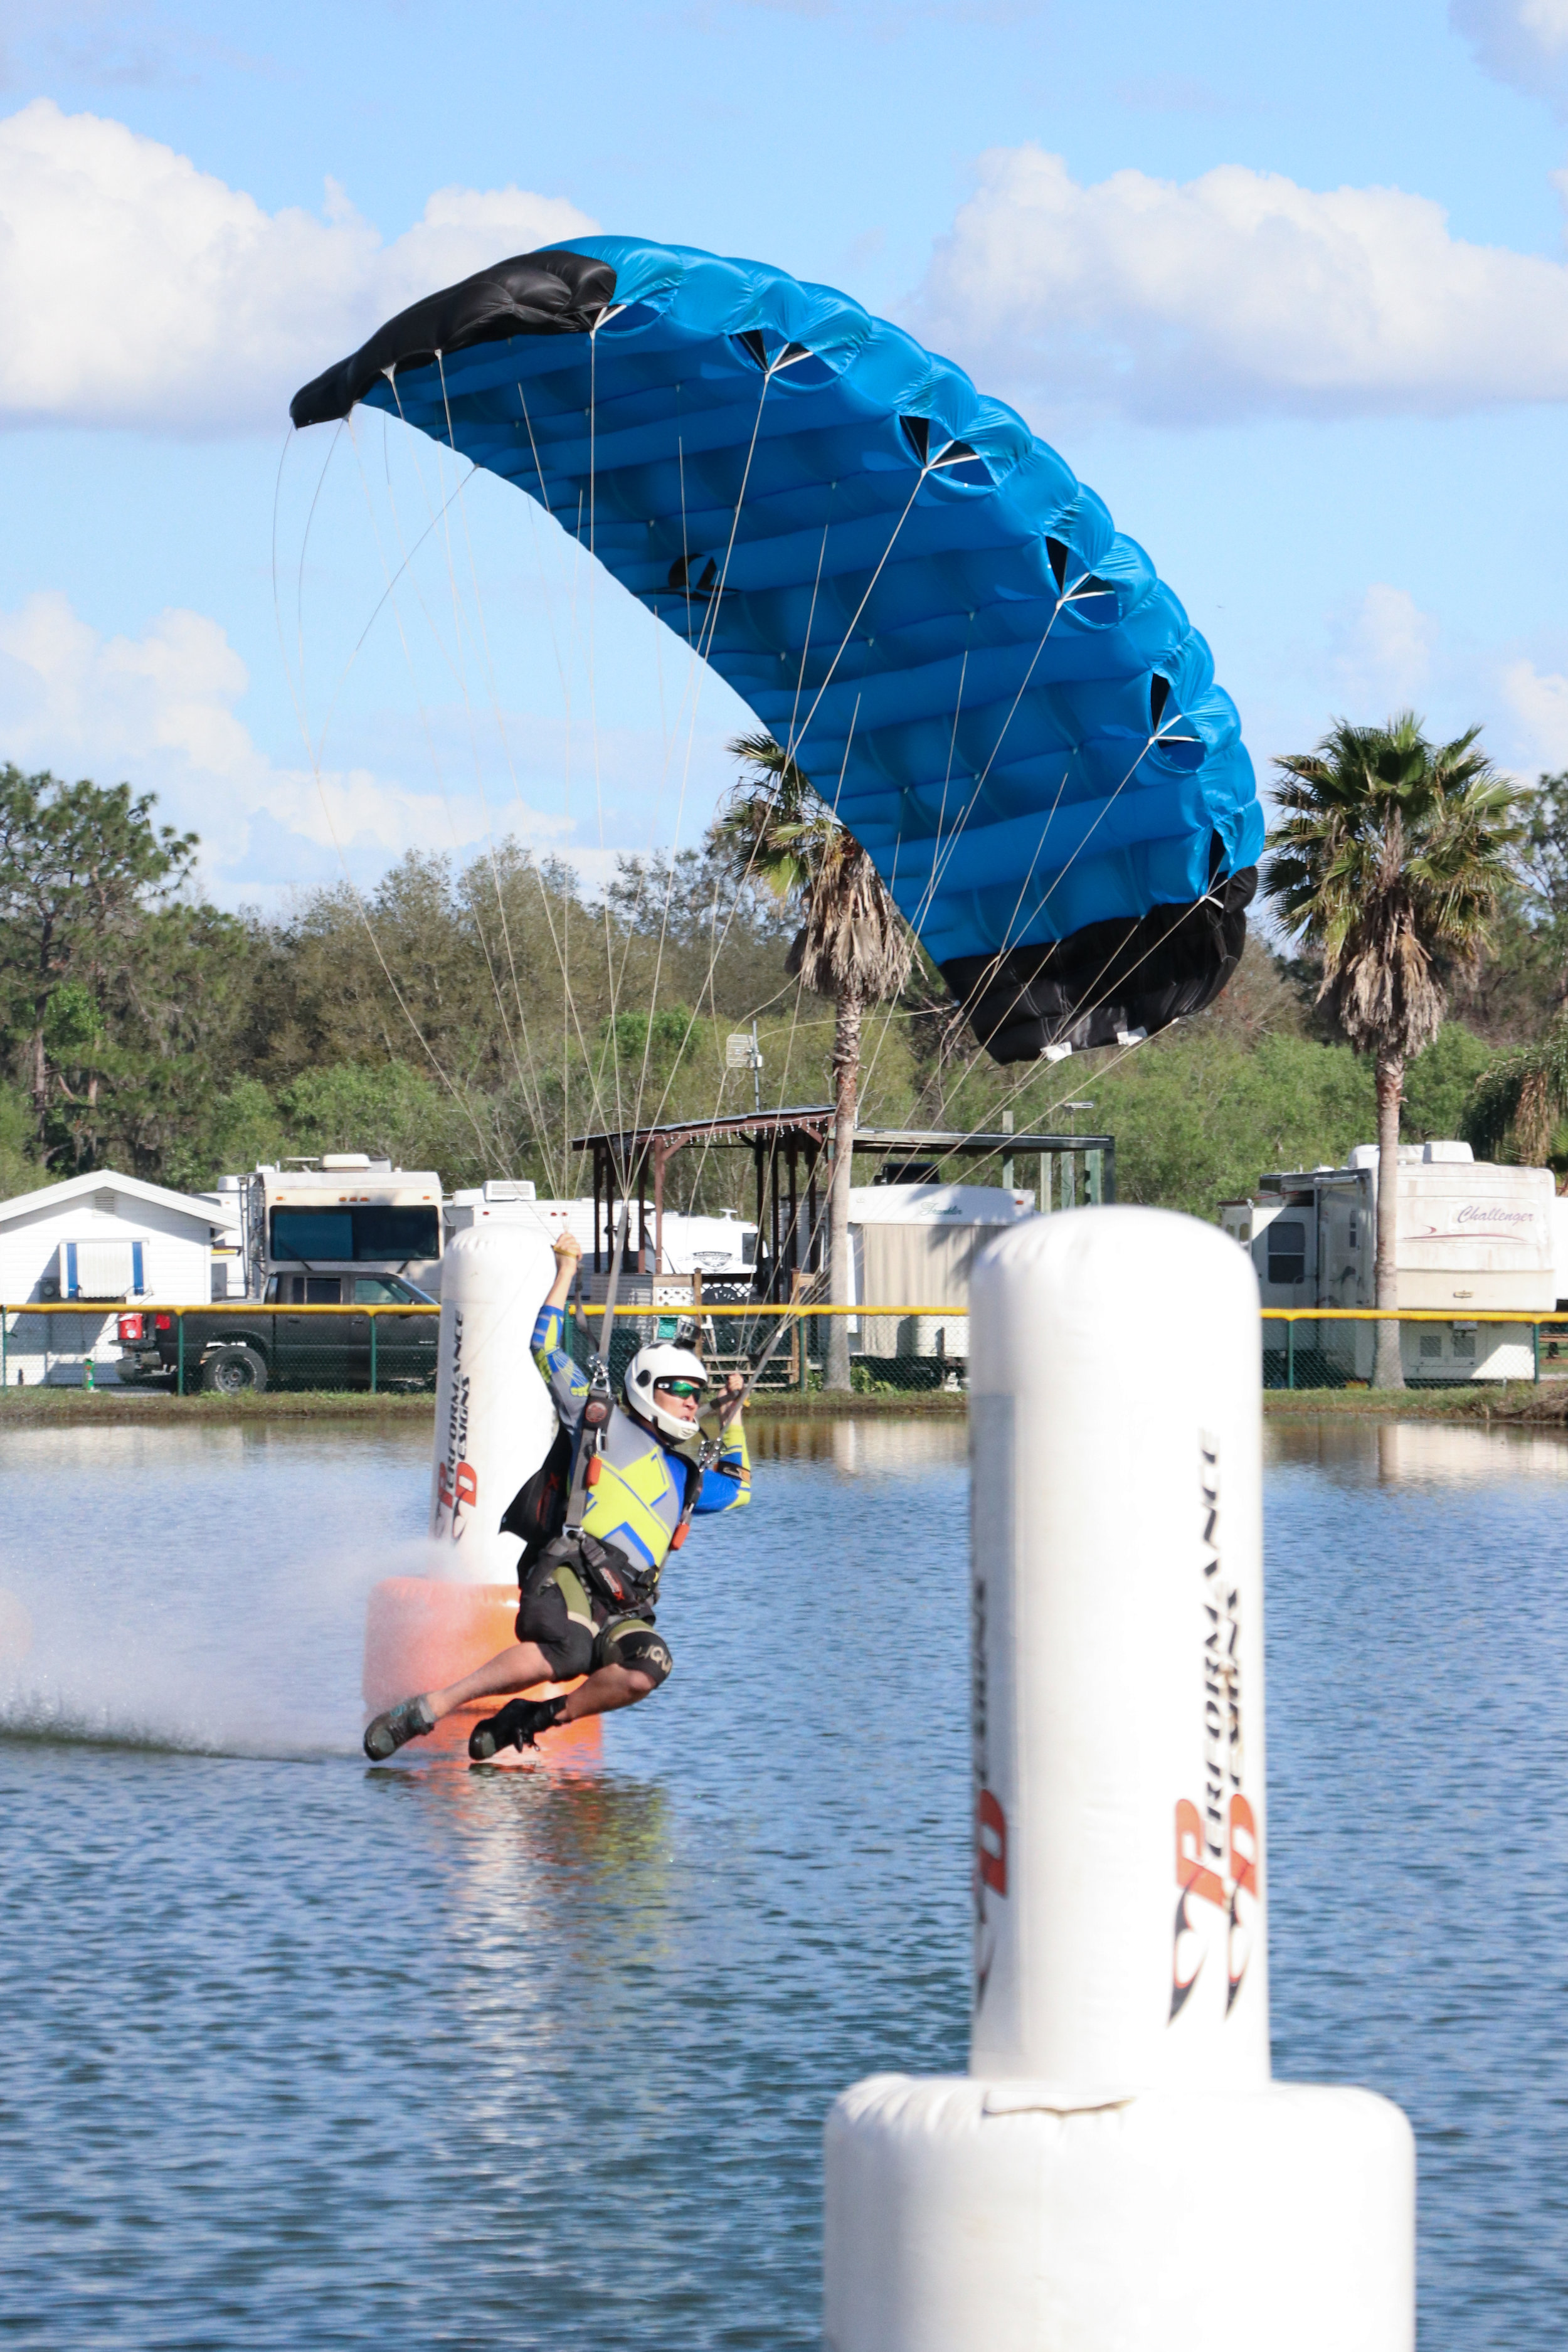 High-Kick-Photography-Skydiving-Canopy-Piloting-Swoop-High-Performance-Parachute-Skydive-City-Zephyrhills-ZHills-Florida-Sports-Active-Competition-LR-11.jpg